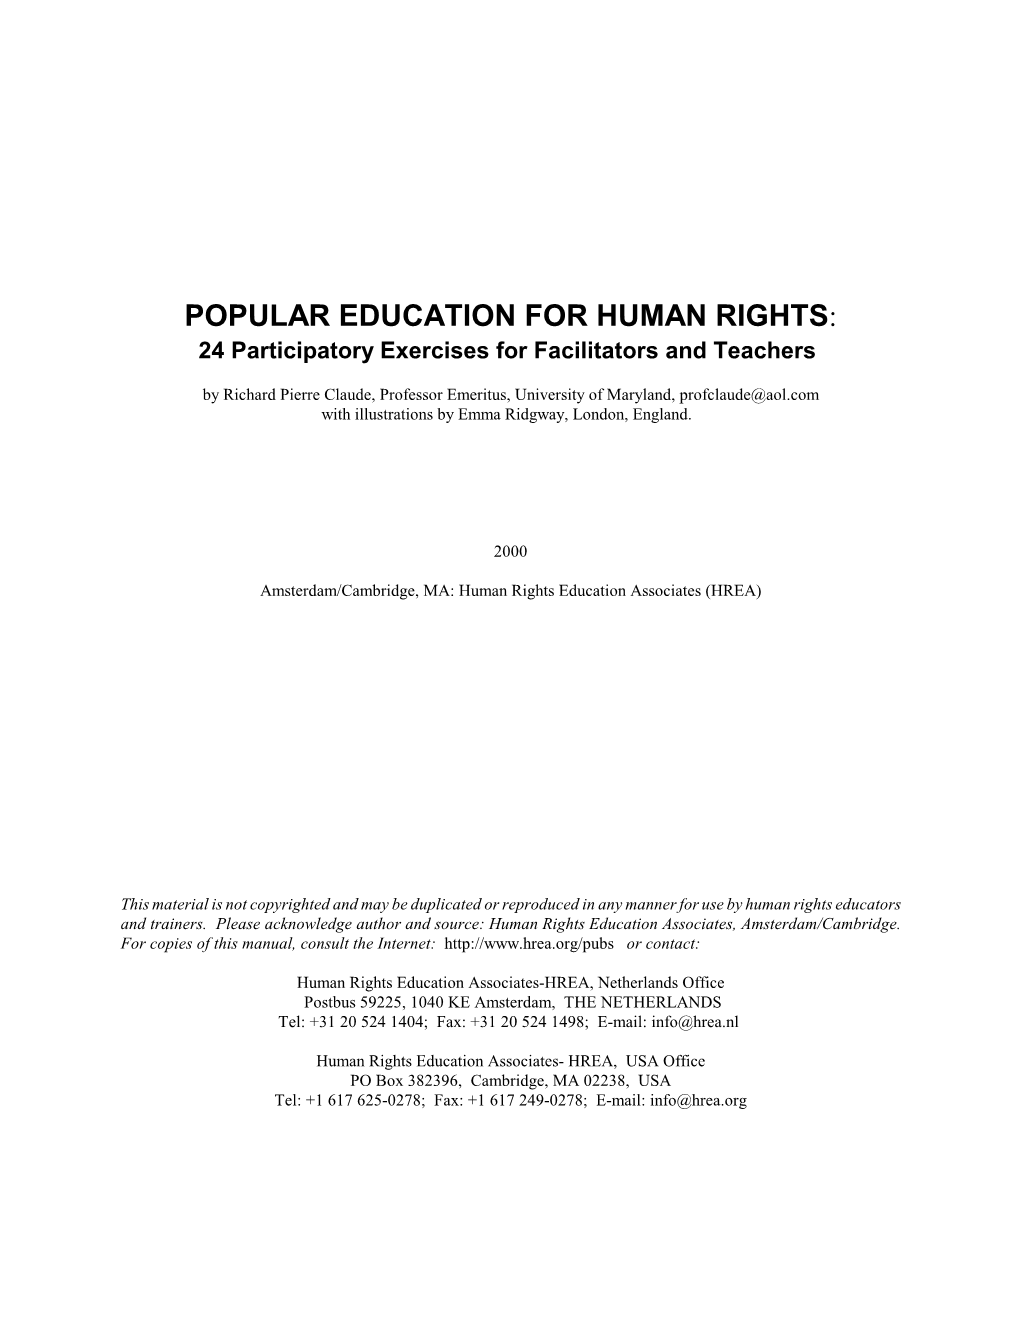 Popular Education for Human Rights.Pdf